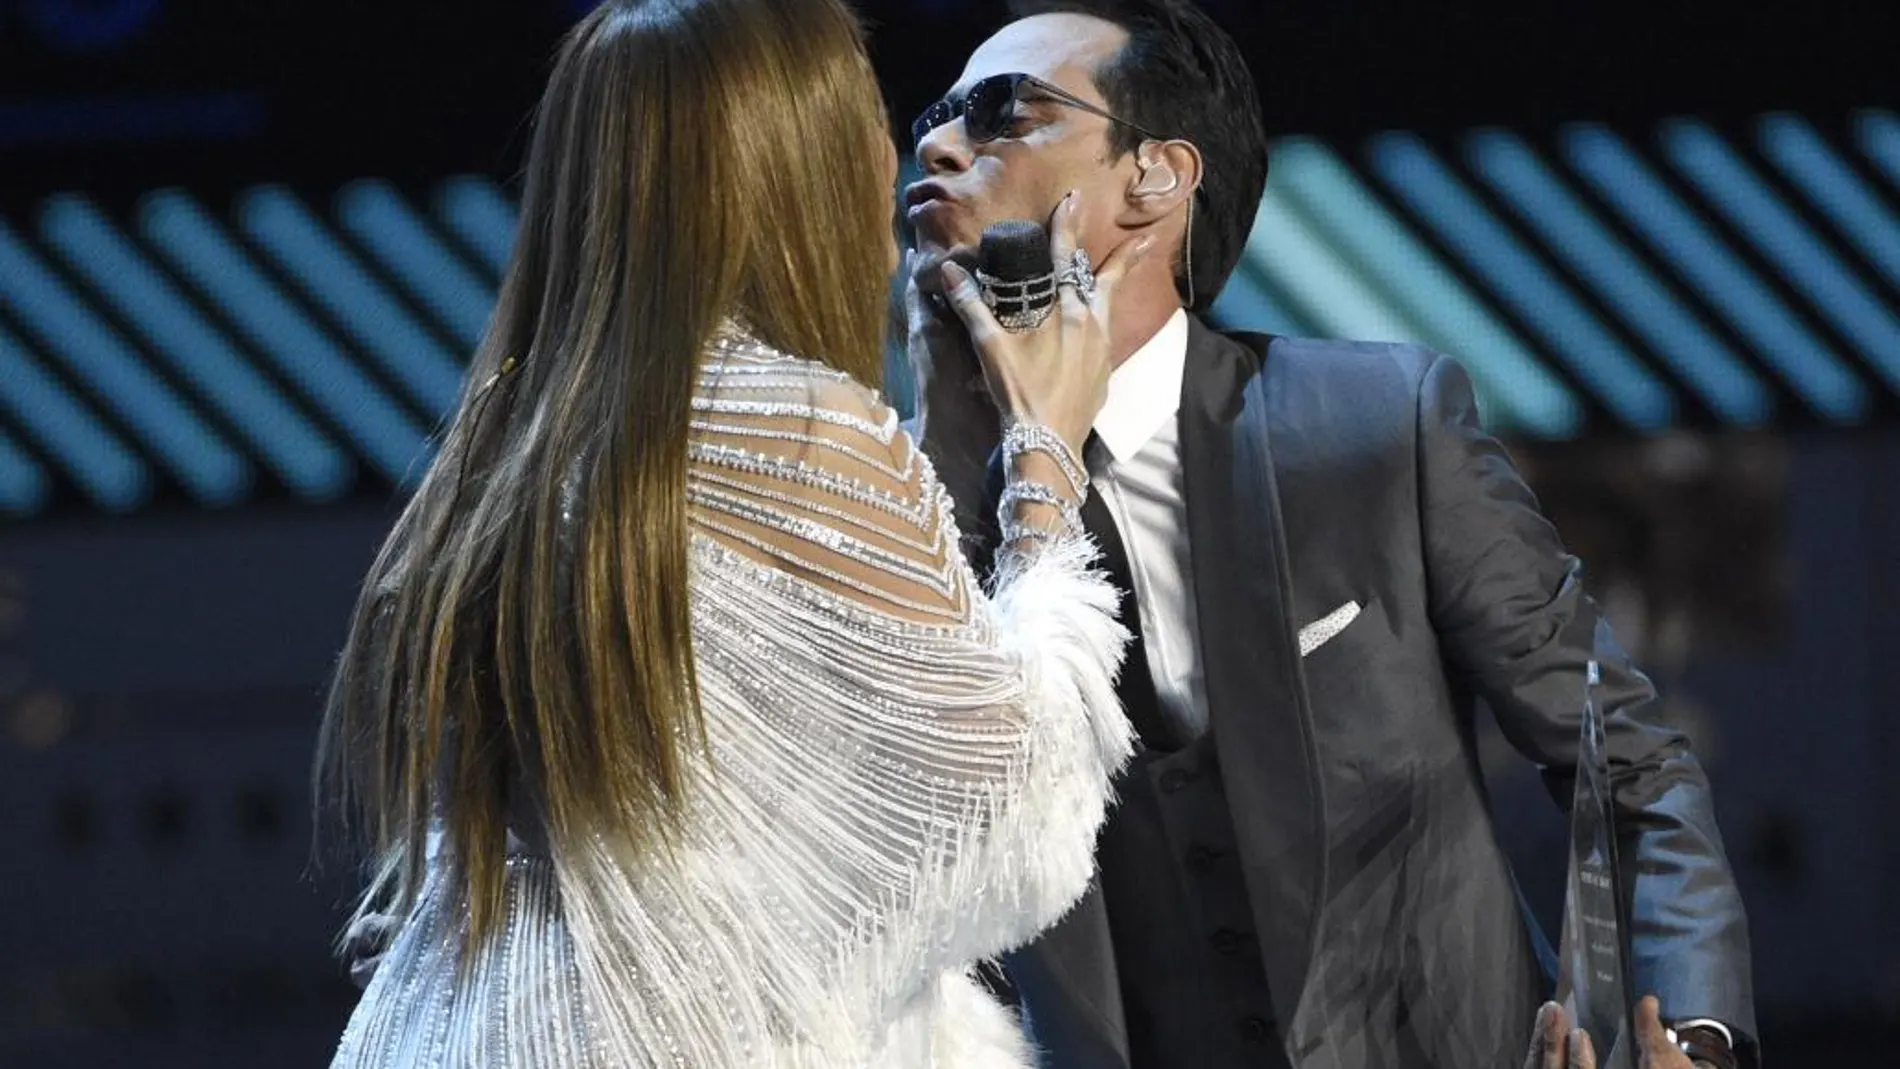 Beso de JLo a Marc Anthony